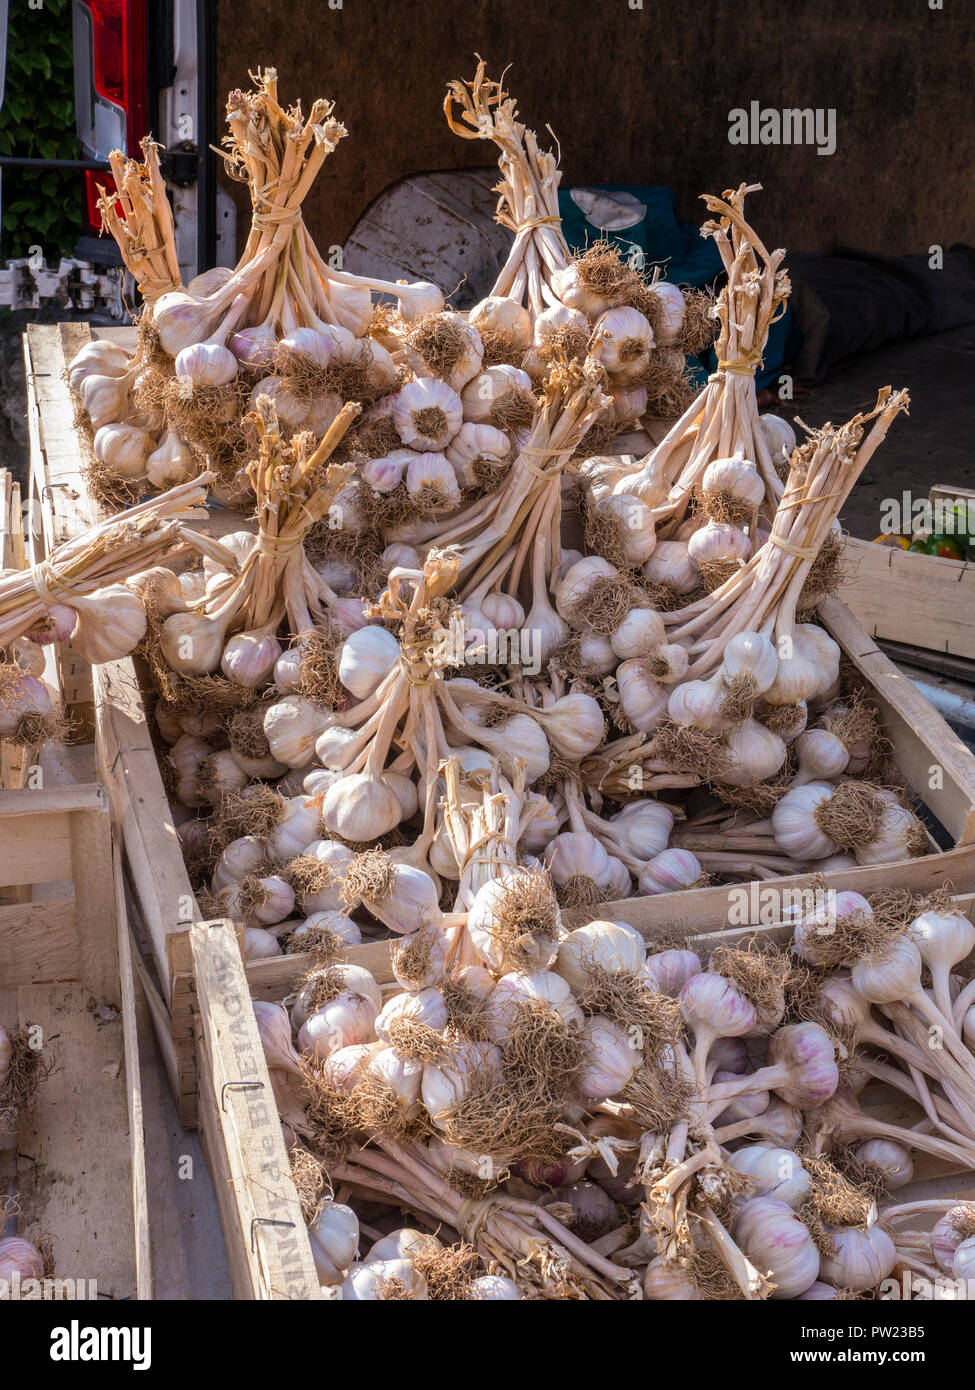 PINK ROSÉ GARLIC AIL LOCAL CONSERVATION MARKET Brittany local Moëlan sur Mer market rustic display conservation produce Brittany France Stock Photo